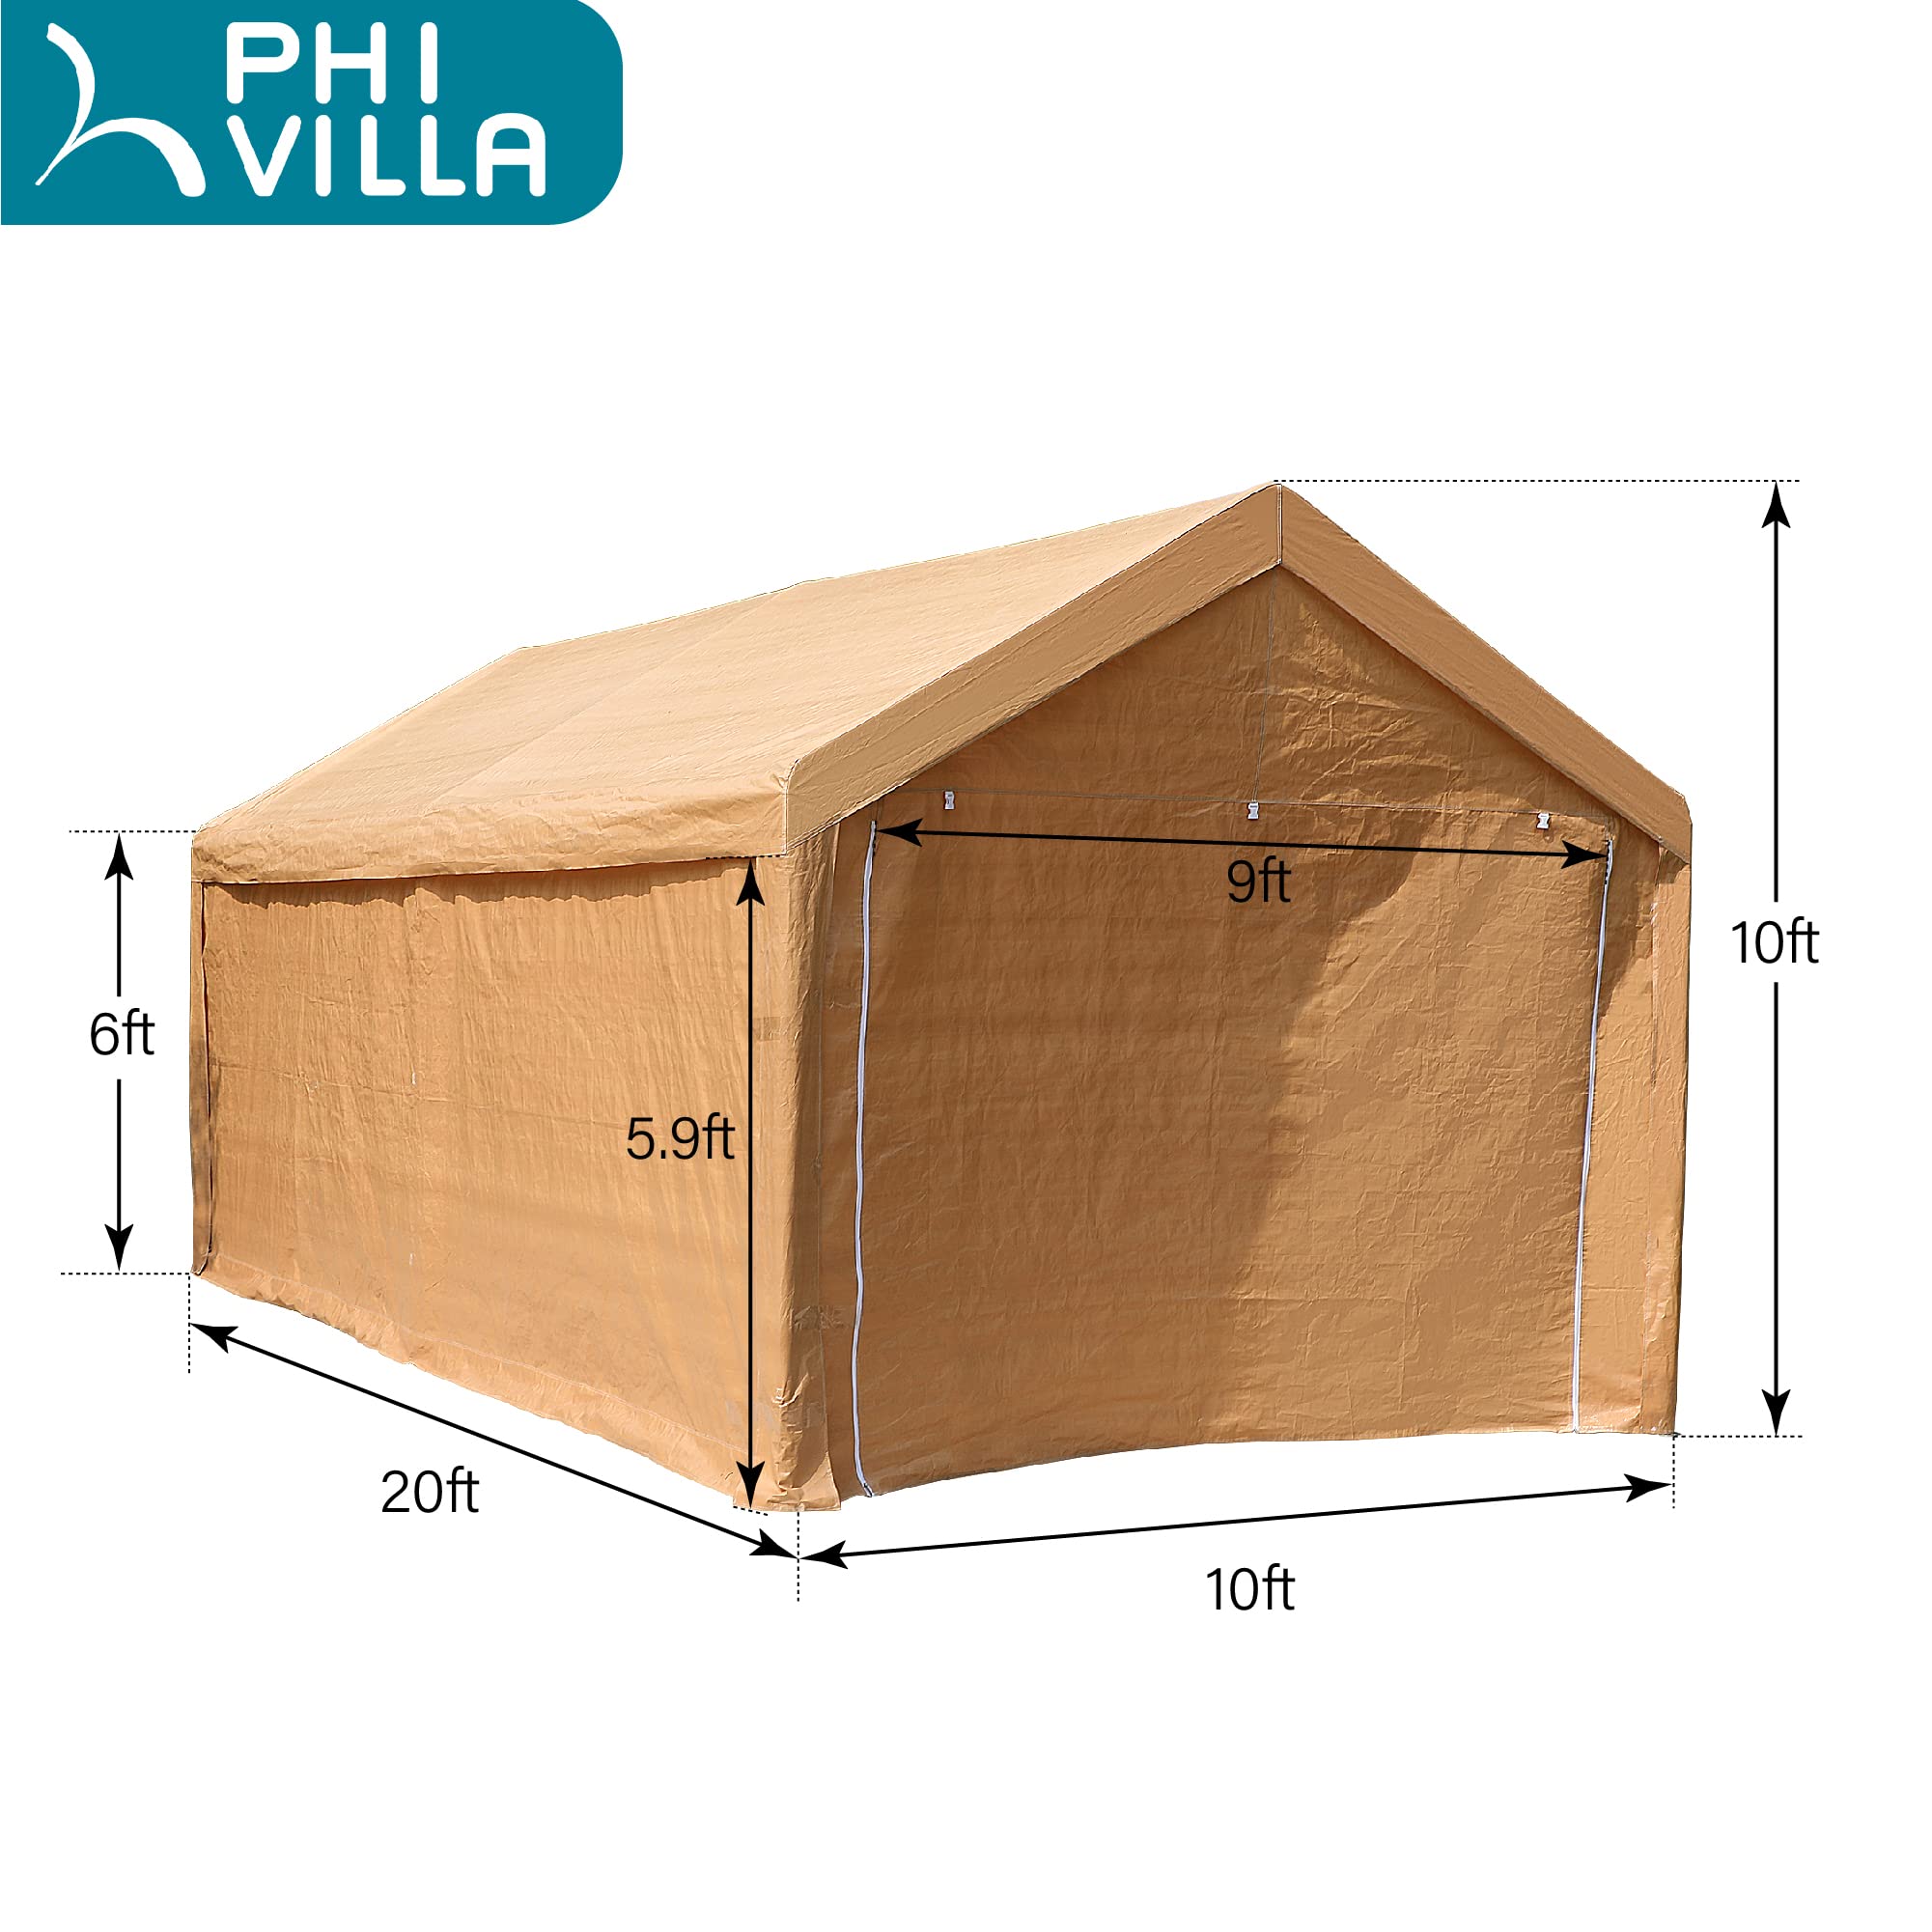 PHI VILLA 10x20 ft Heavy Duty Carport Car Canopy Garage Extra Storage Shelter Boat Party Tents Shed with Removable Sidewalls and Doors, Beige